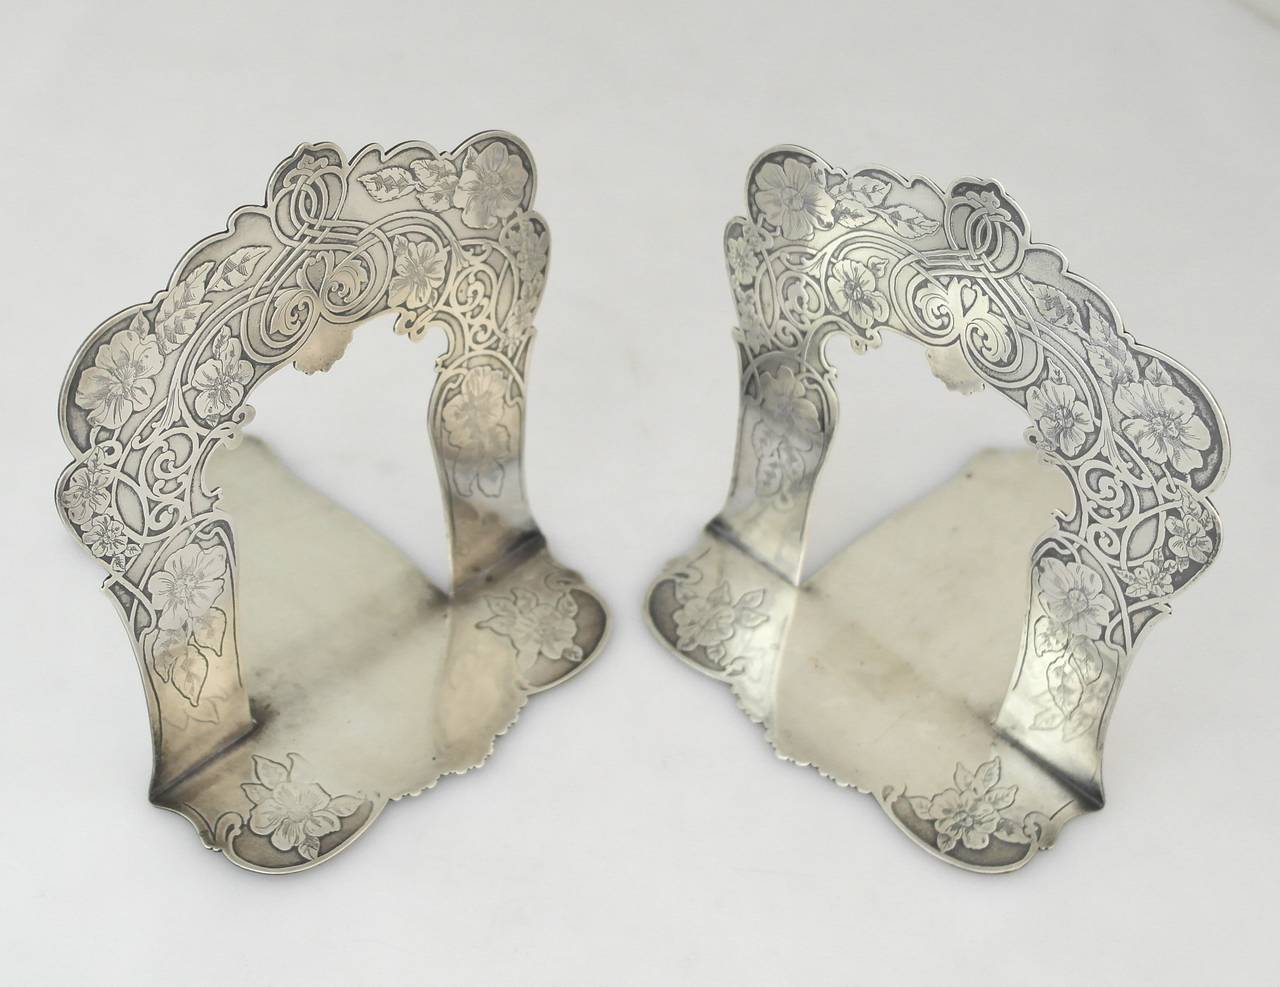 Early 20th Century Museum Quality Tiffany & Co. Sterling Silver Pair of Bookends, 1905